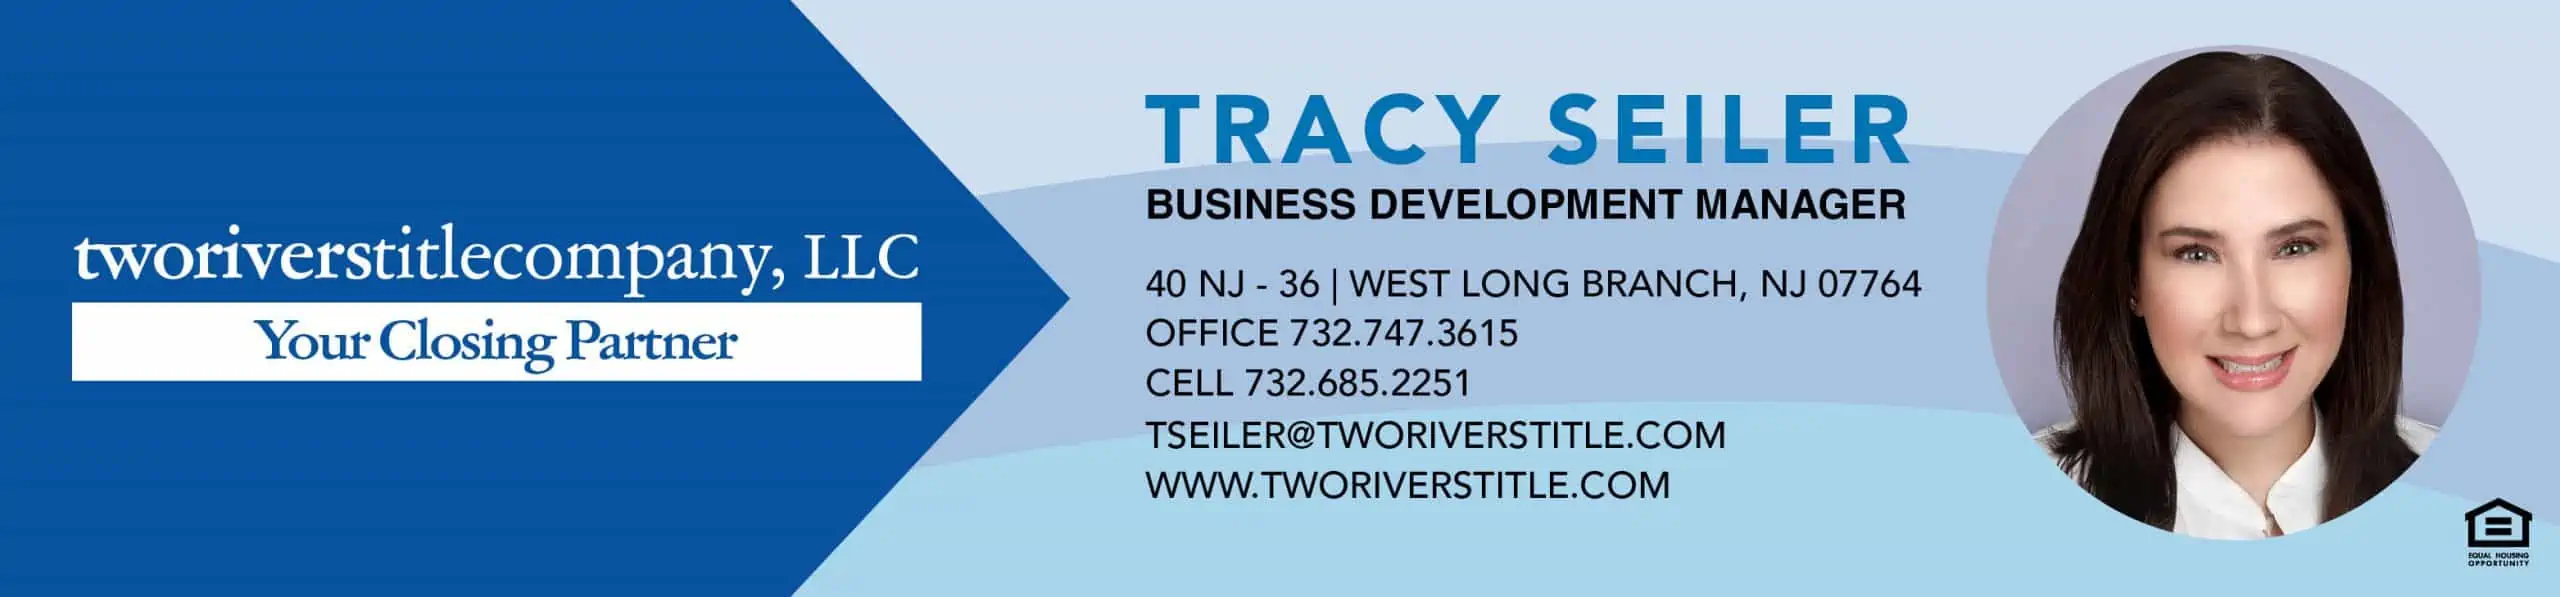 Tracey Seiler Two Rivers Title Company